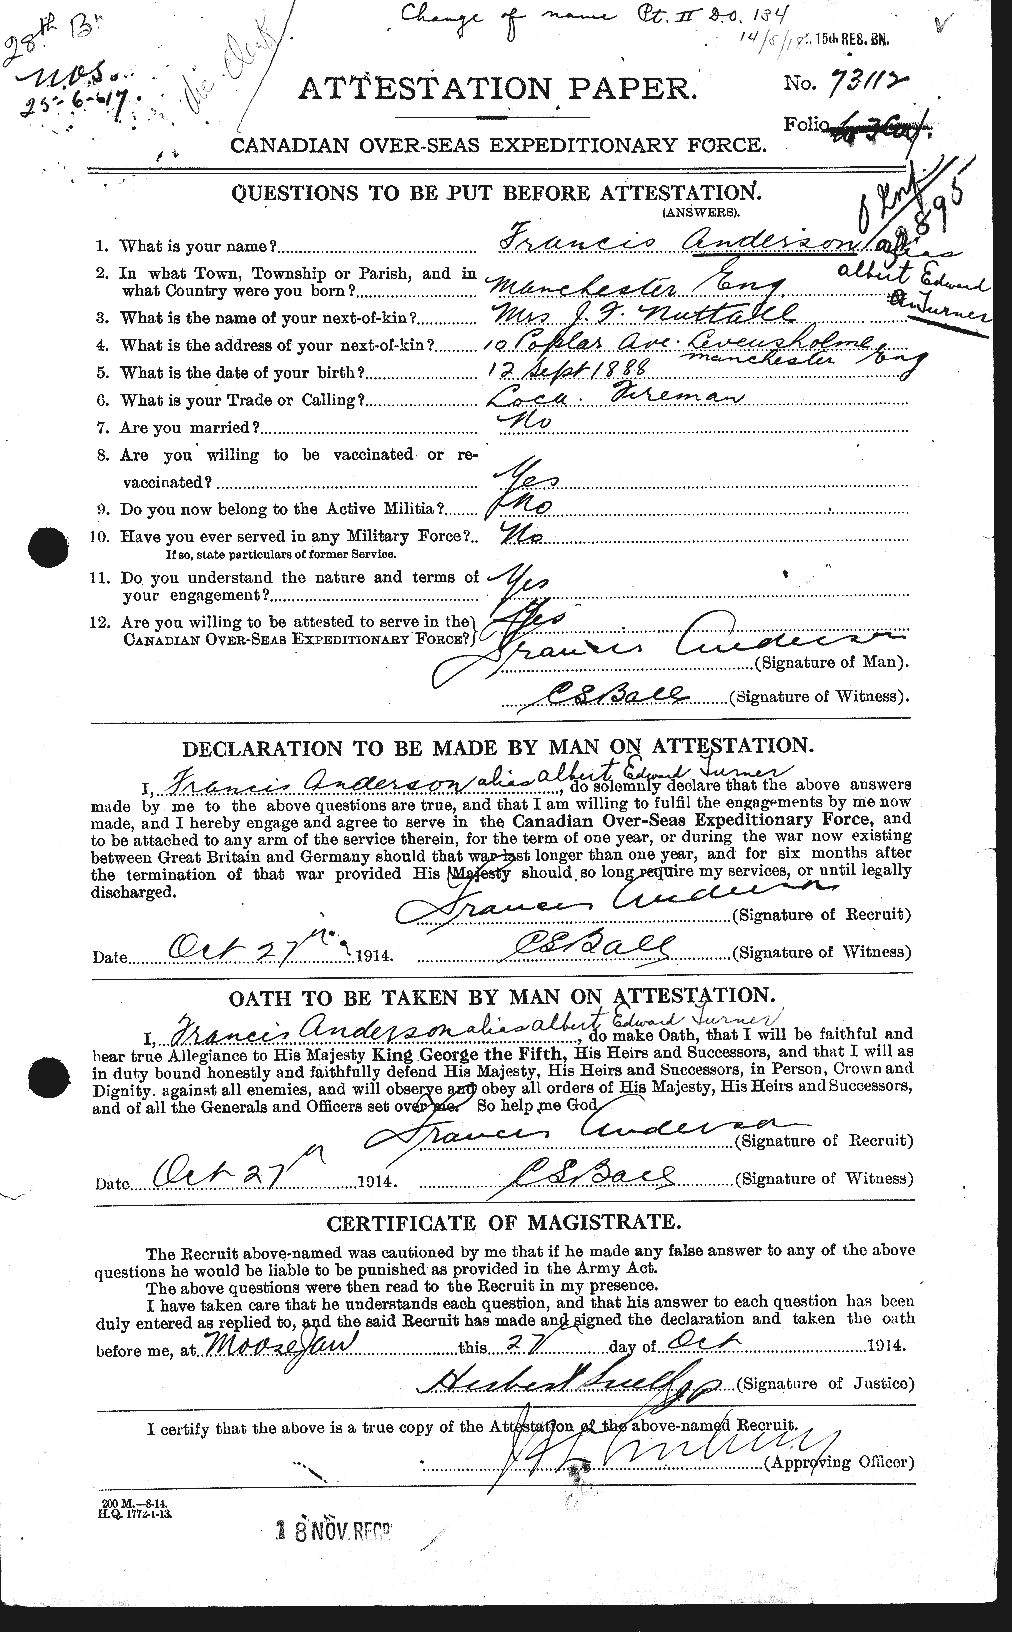 Personnel Records of the First World War - CEF 646215a